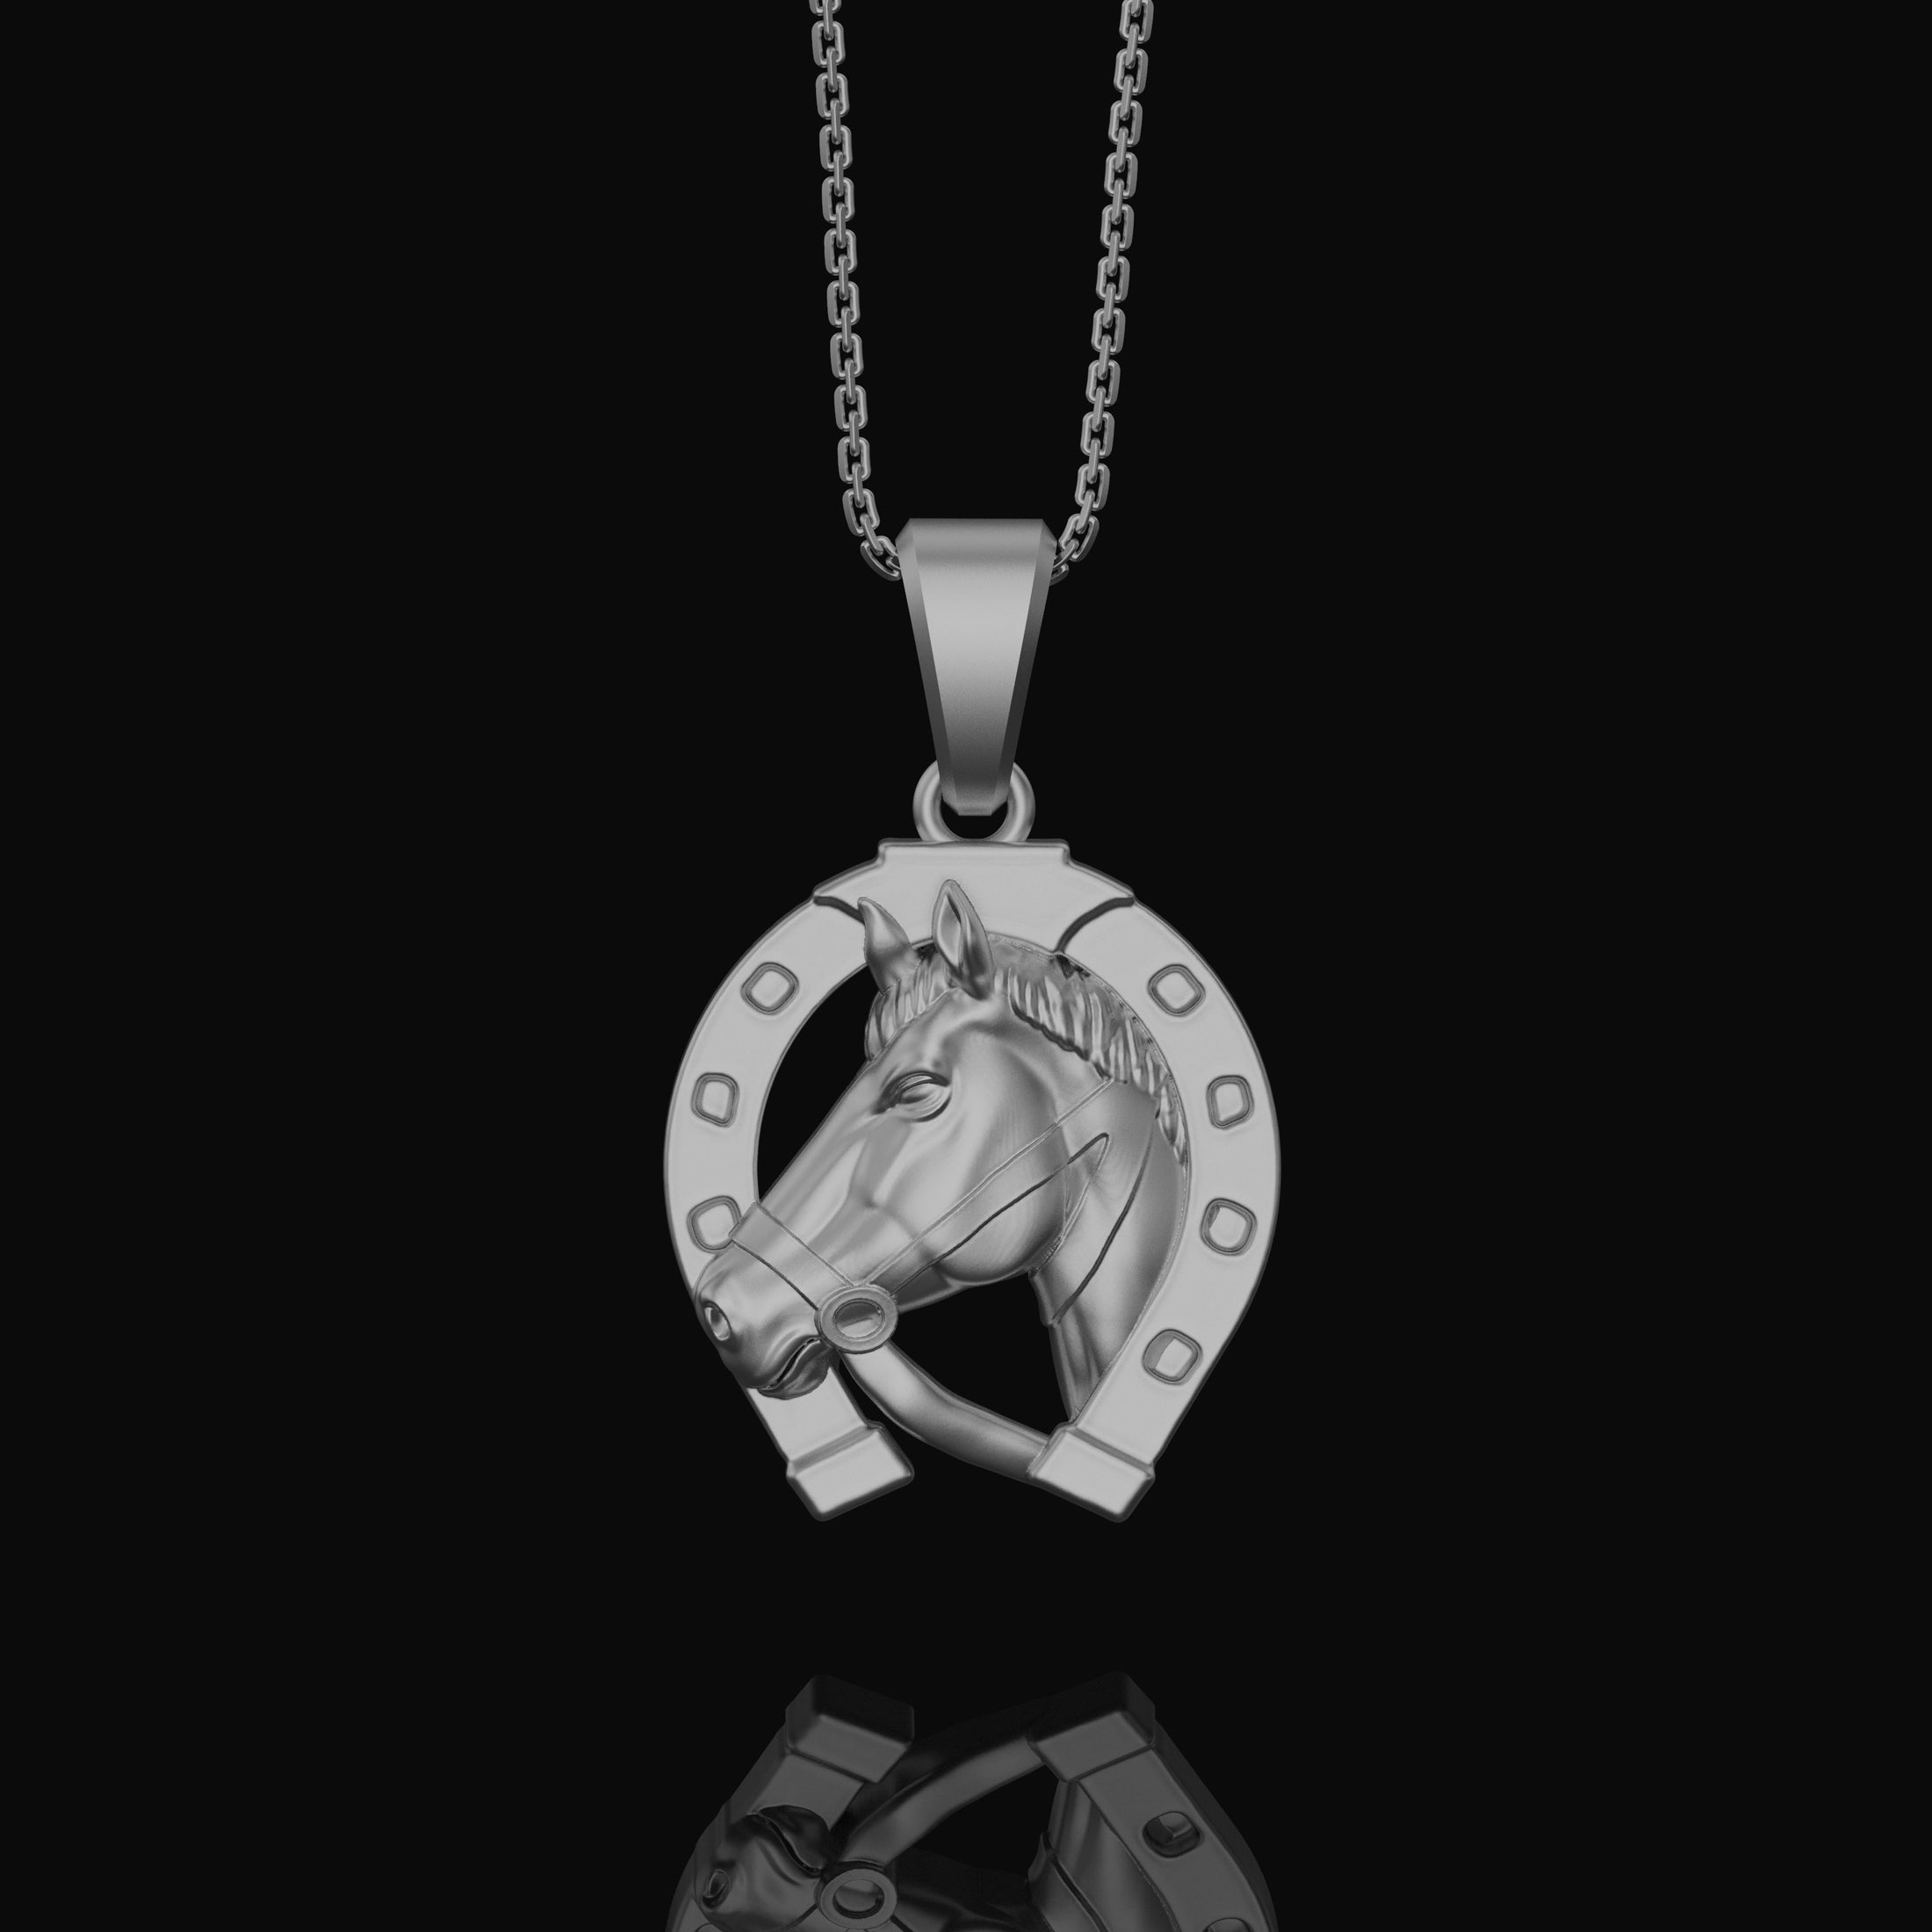 Silver Horseshoe Pendant - Lucky Charm Necklace, Good Luck Gift, Symbol of Fortune, Protective Jewelry